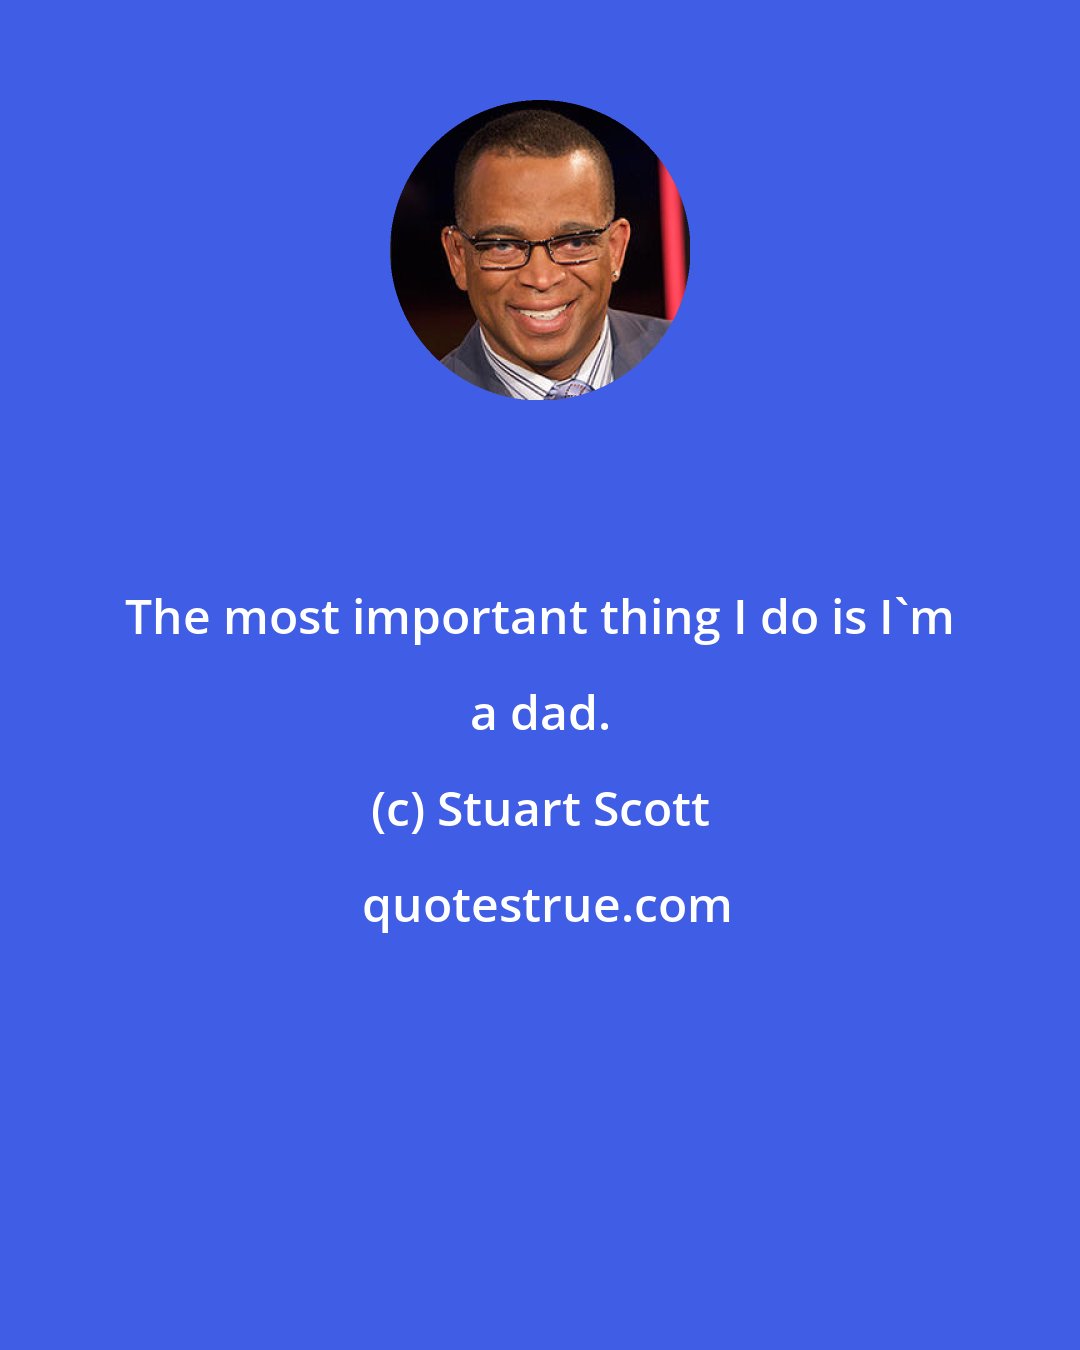 Stuart Scott: The most important thing I do is I'm a dad.